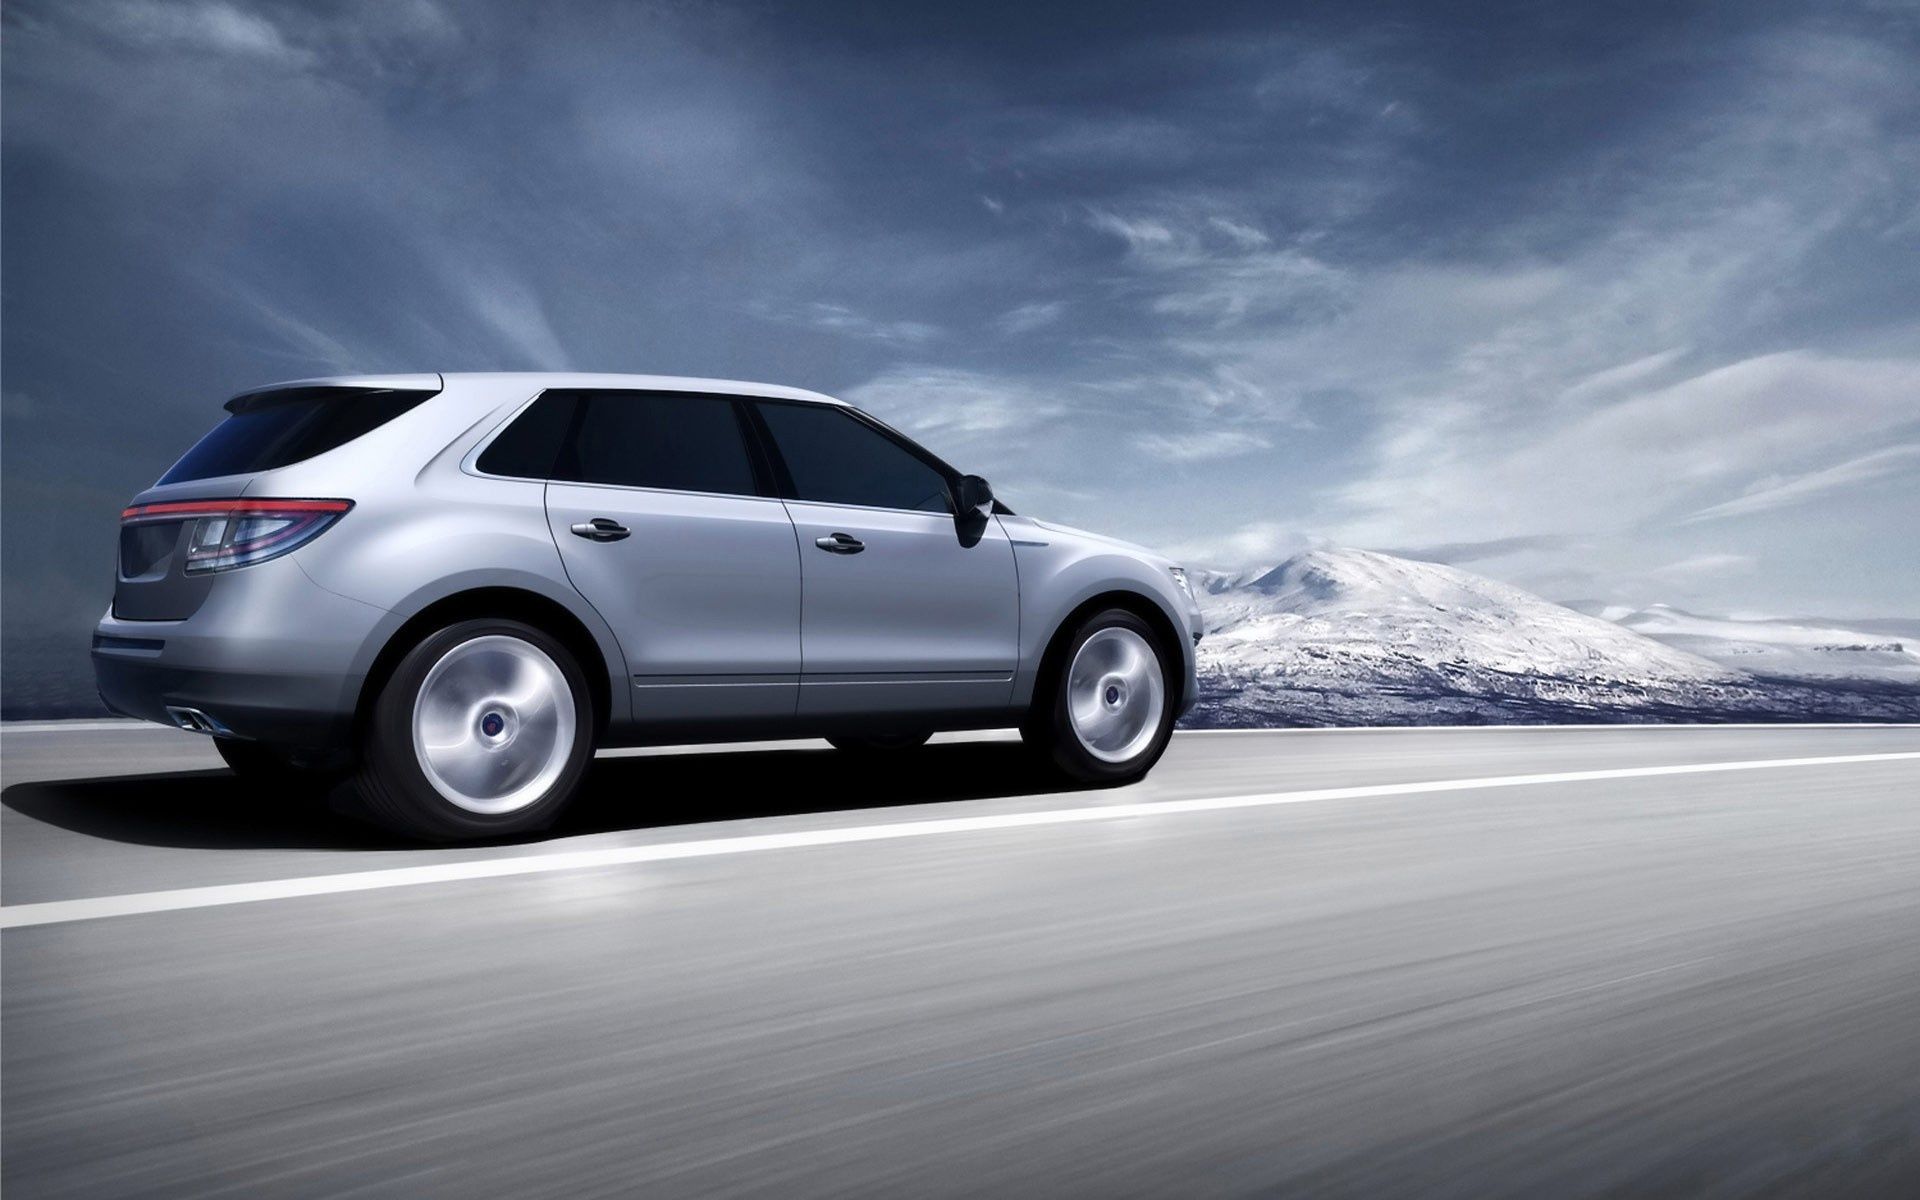 SUV wallpapers and images - wallpapers, pictures, photos